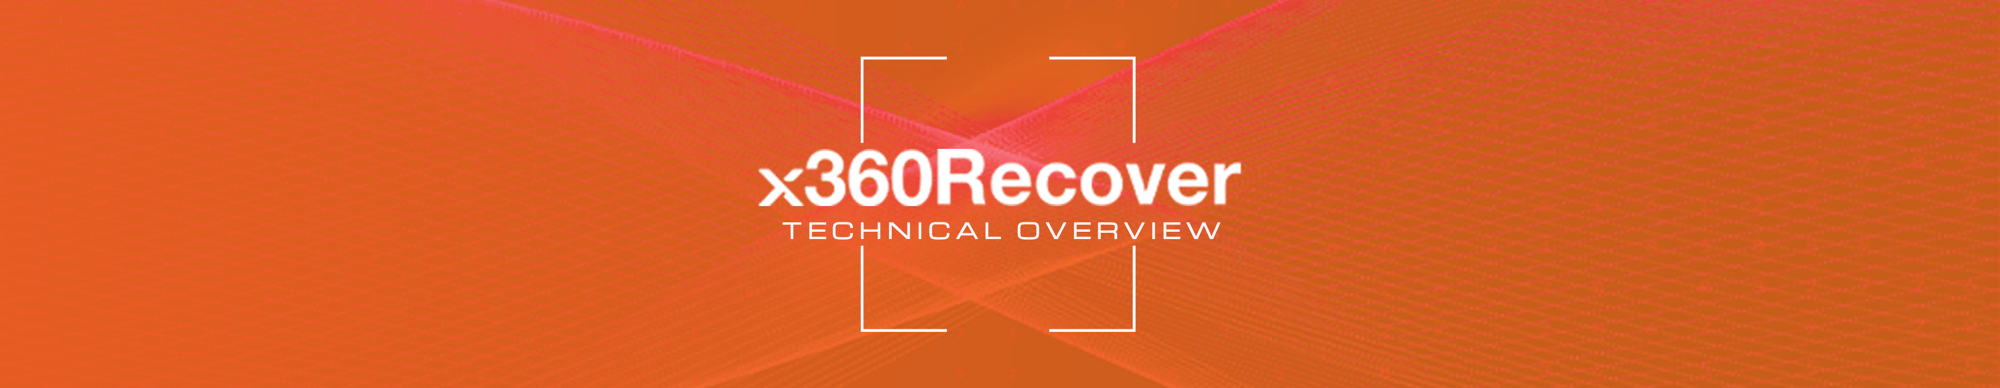 x360Recover